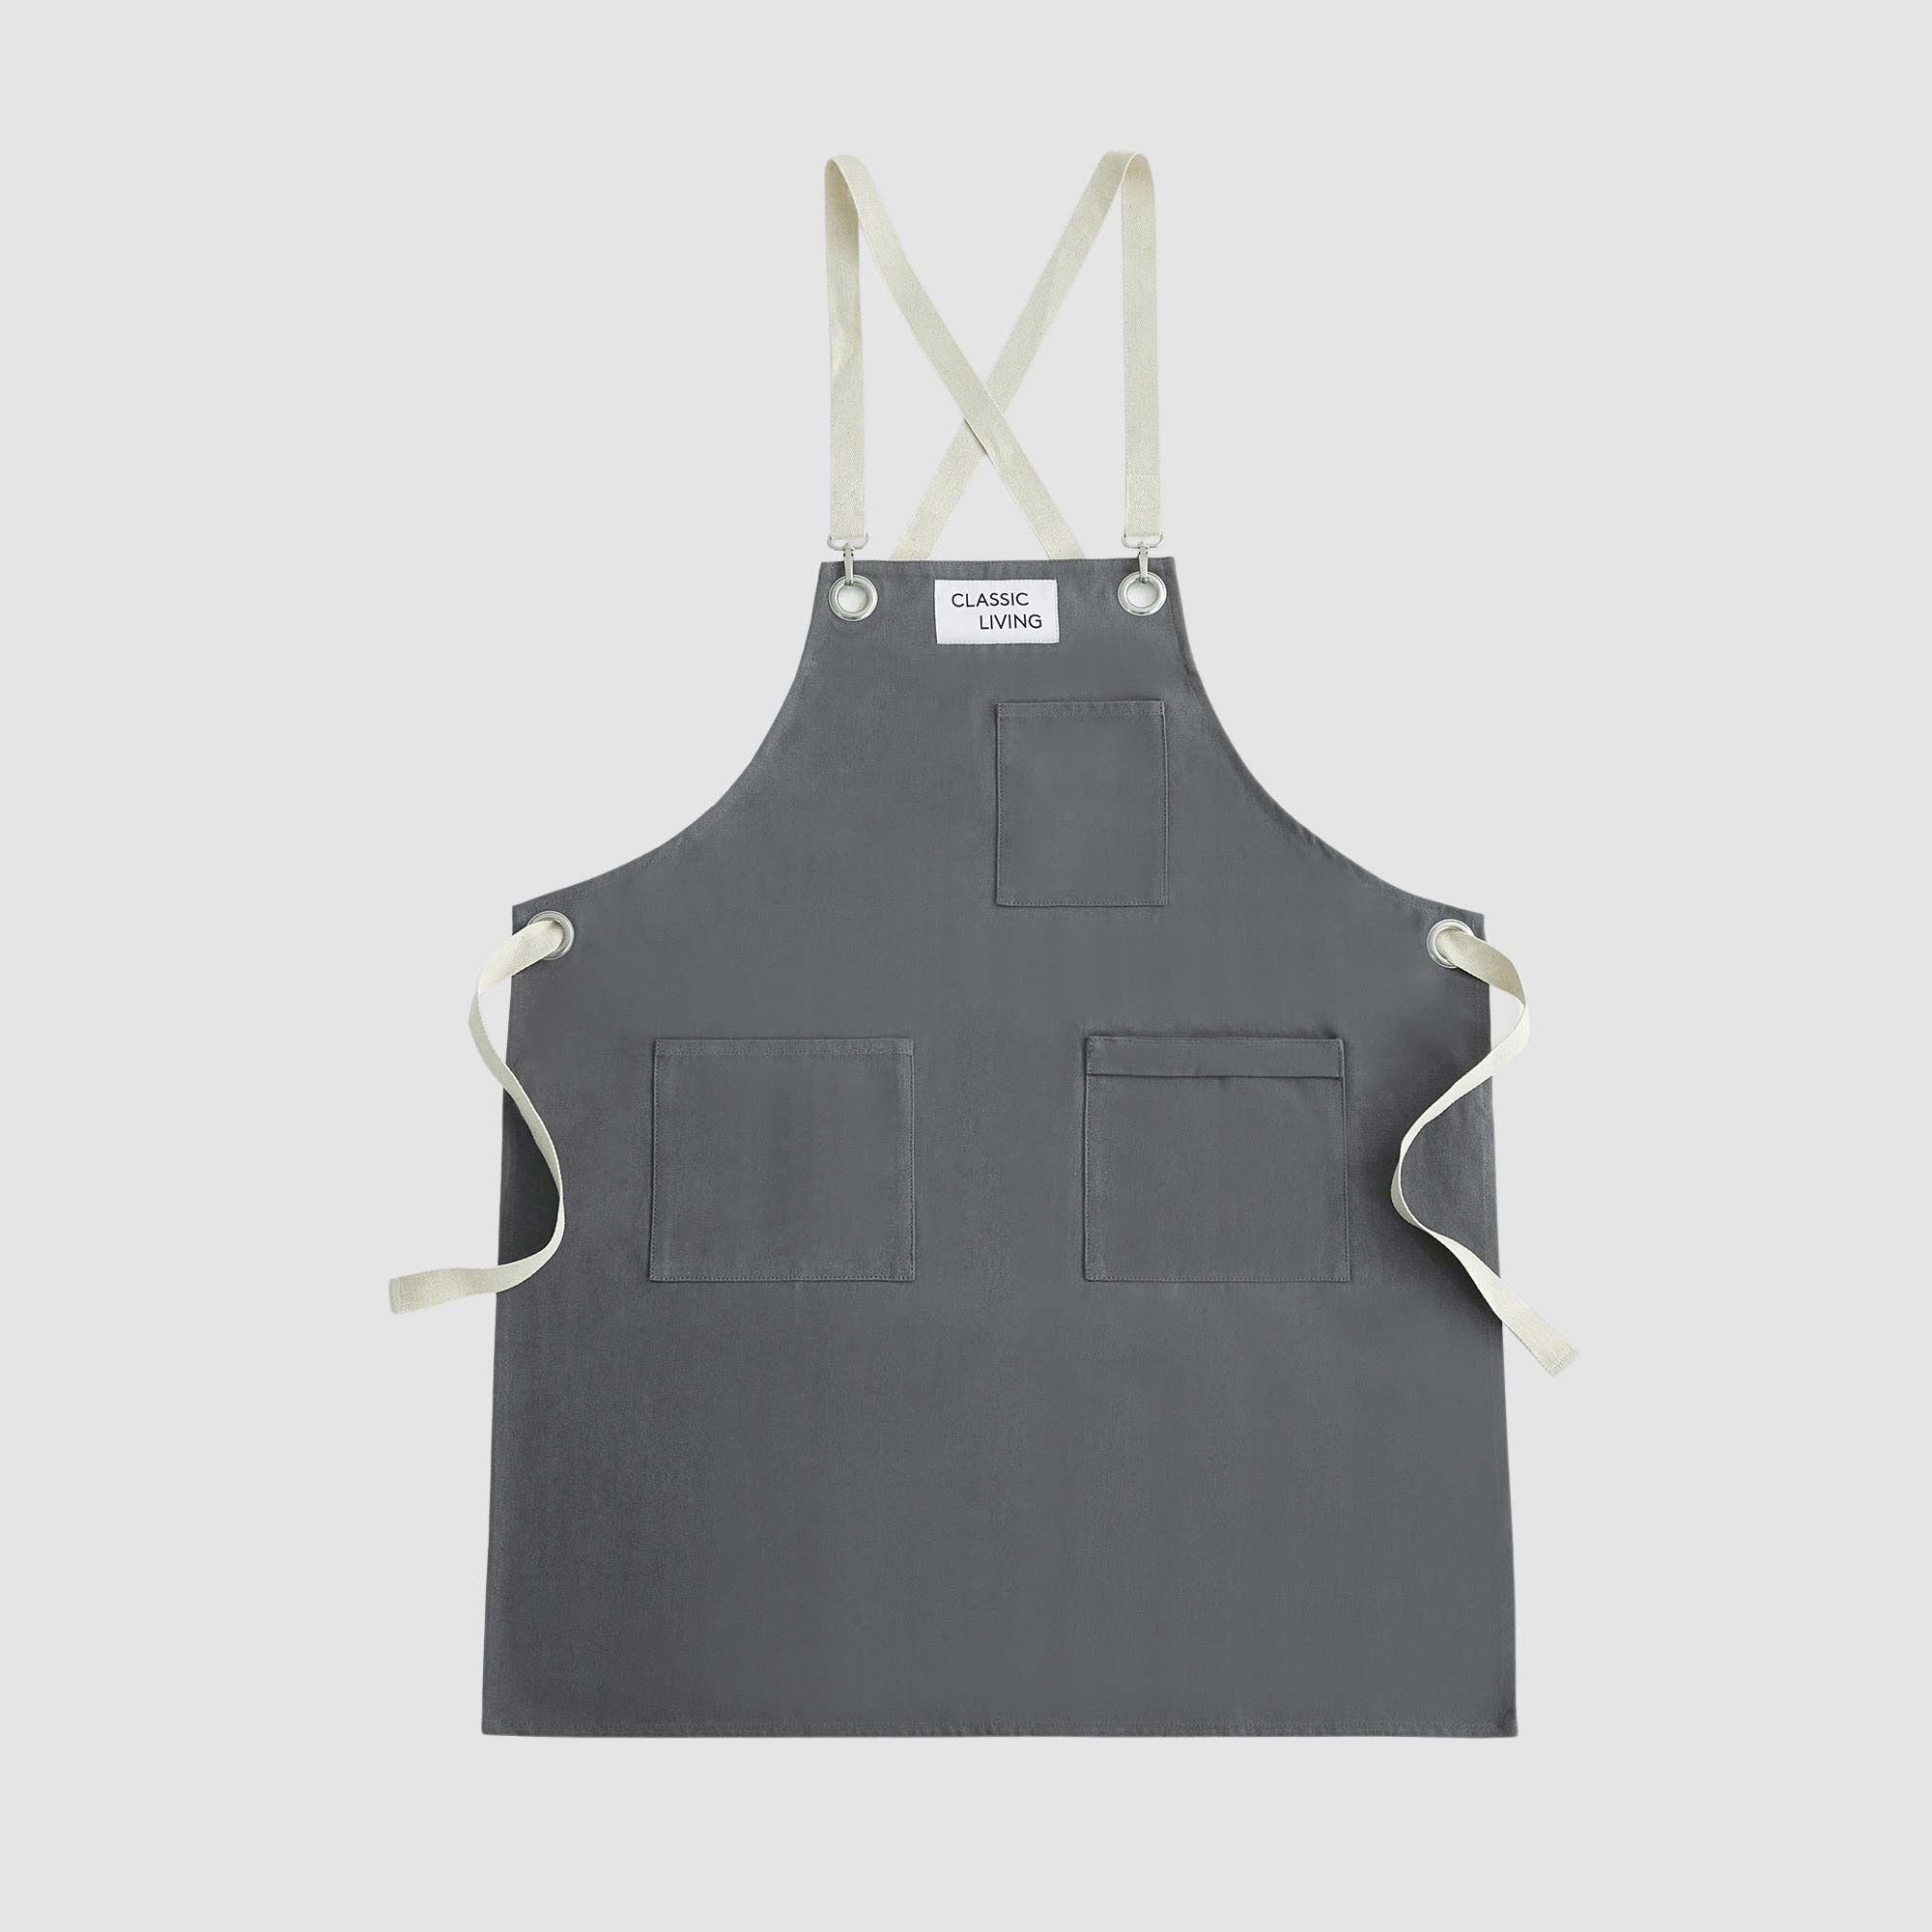 Classic Living Apron Pewter